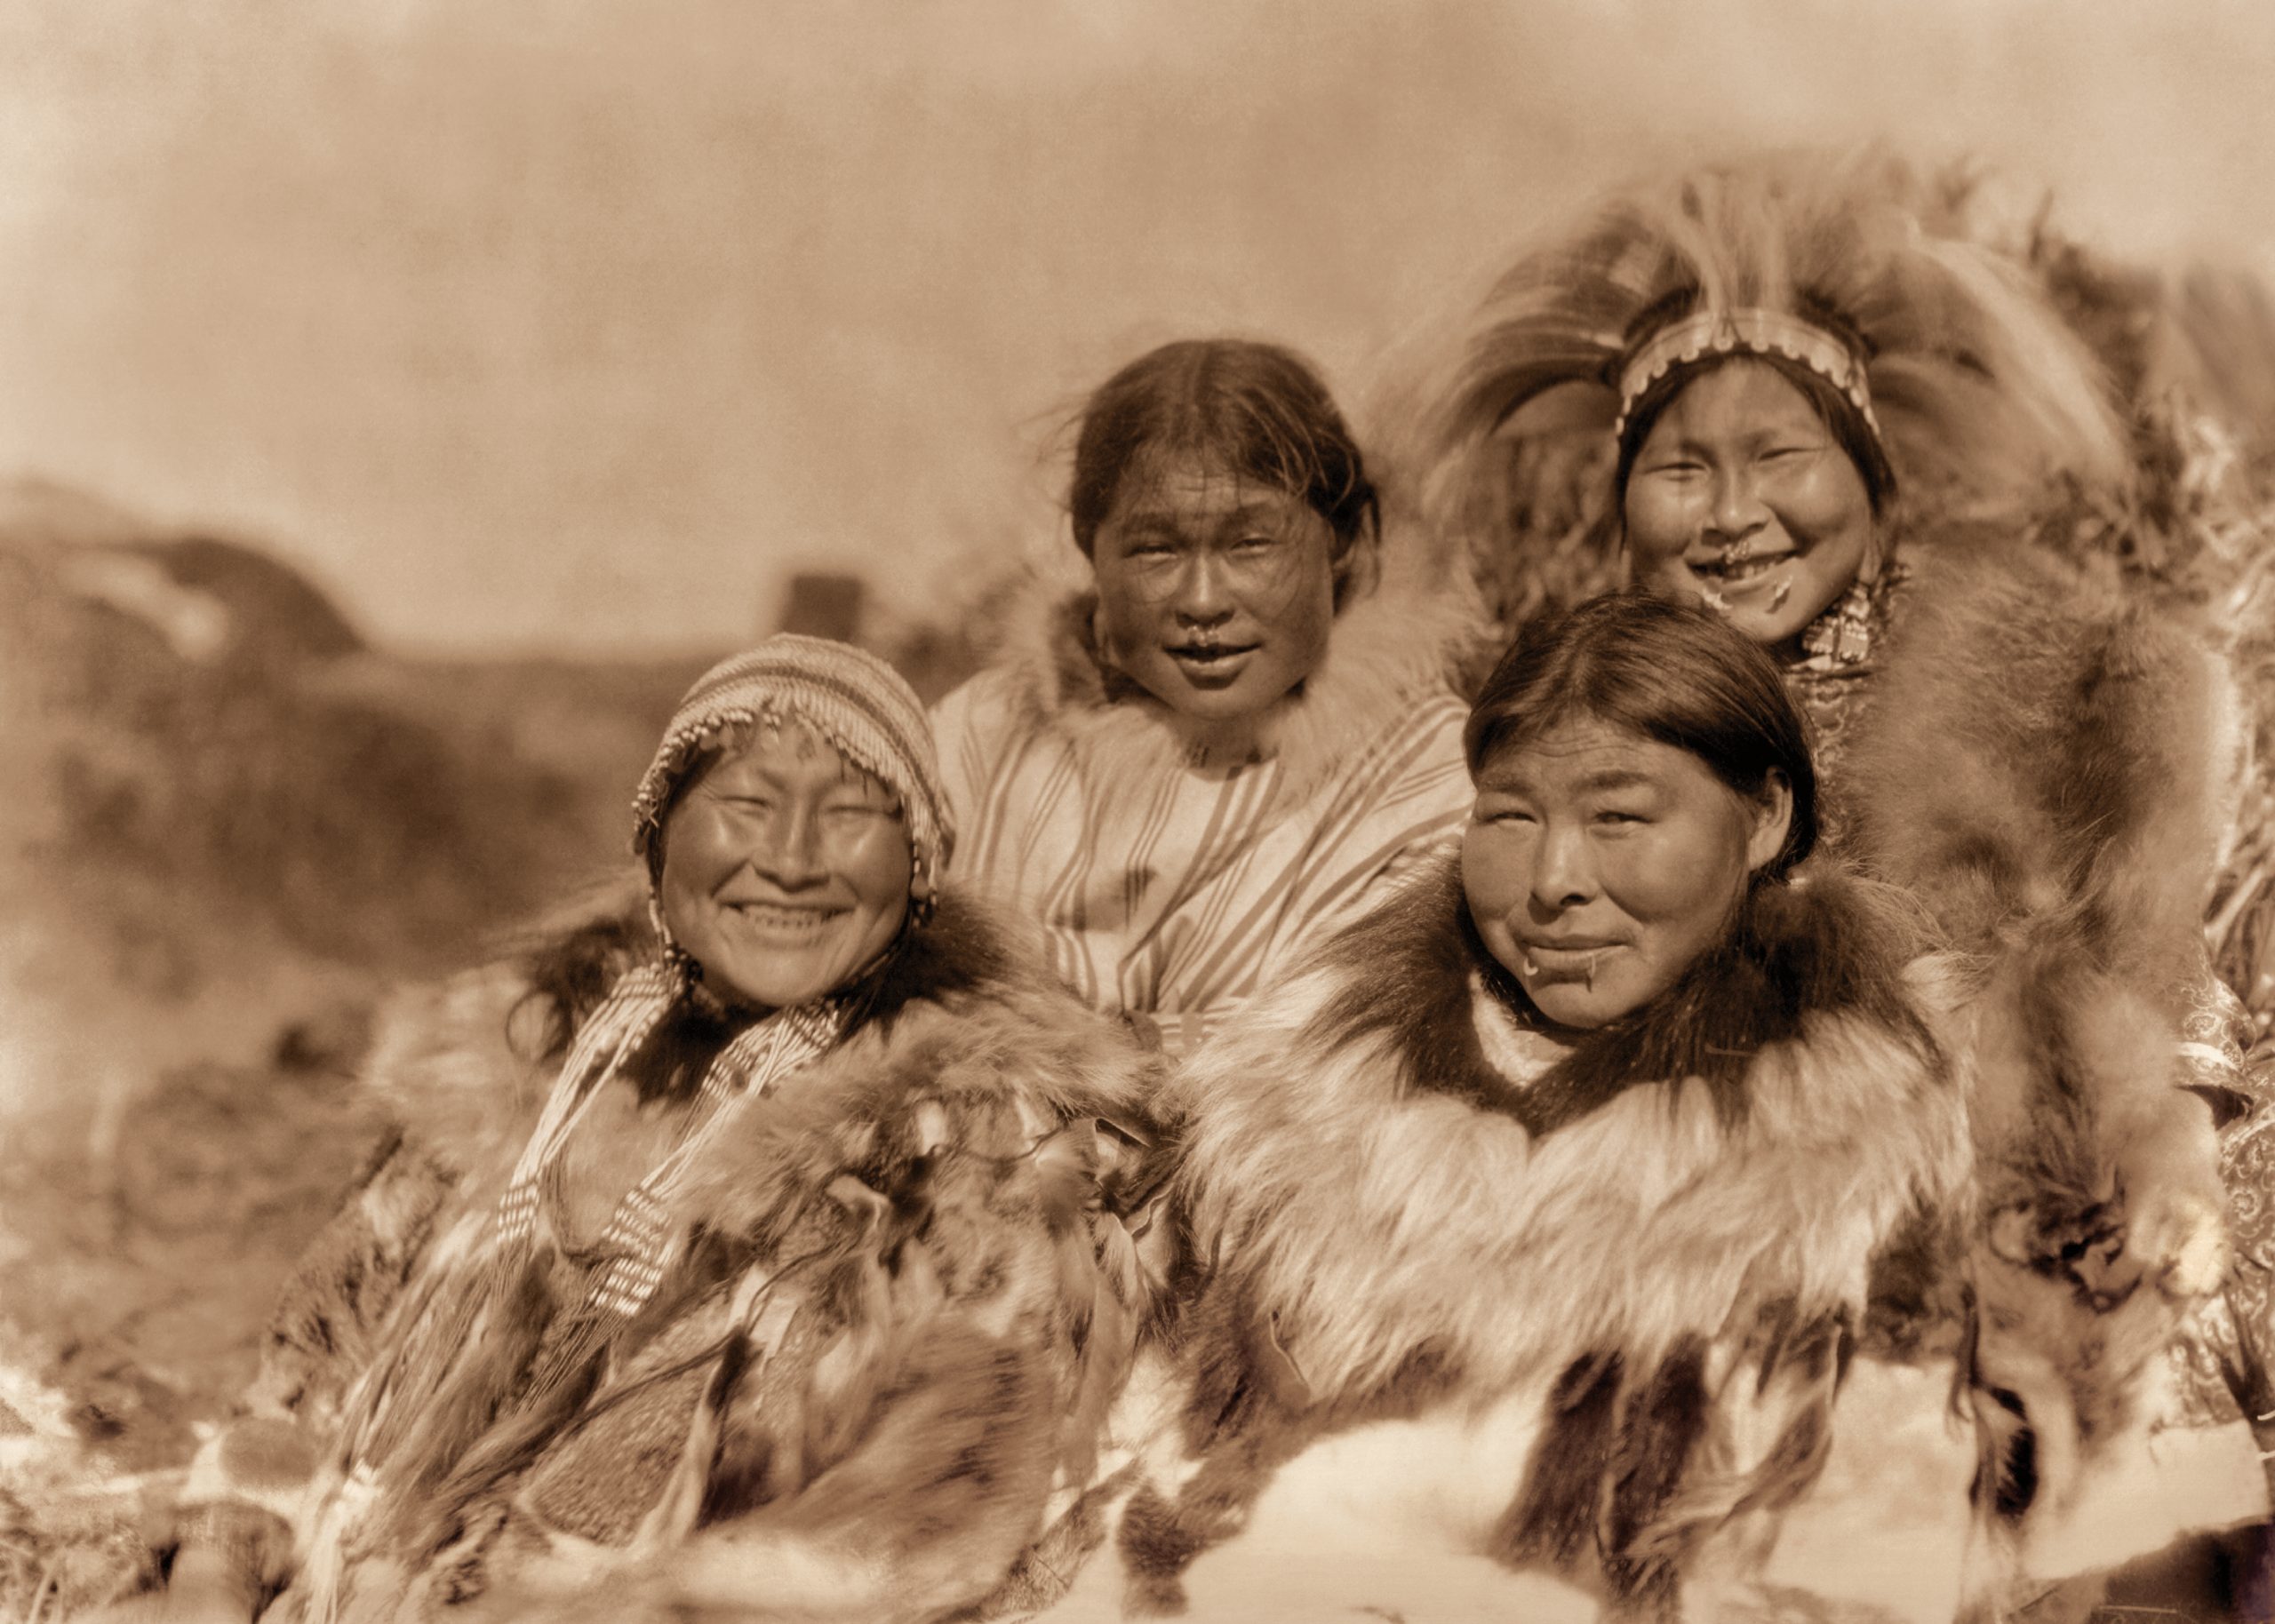 Four Indigenous women of Nunavik Island in the Bering Sea. From the new exhibition, "Edward S. Curtis: Unpublished Alaska, the Lost Photographs," opening Sept. 16 at The Muskegon Museum of Art in Michigan. (Photo by Edward Sherriff Curtis, 1927, Courtesy of the Curtis Legacy Foundation)